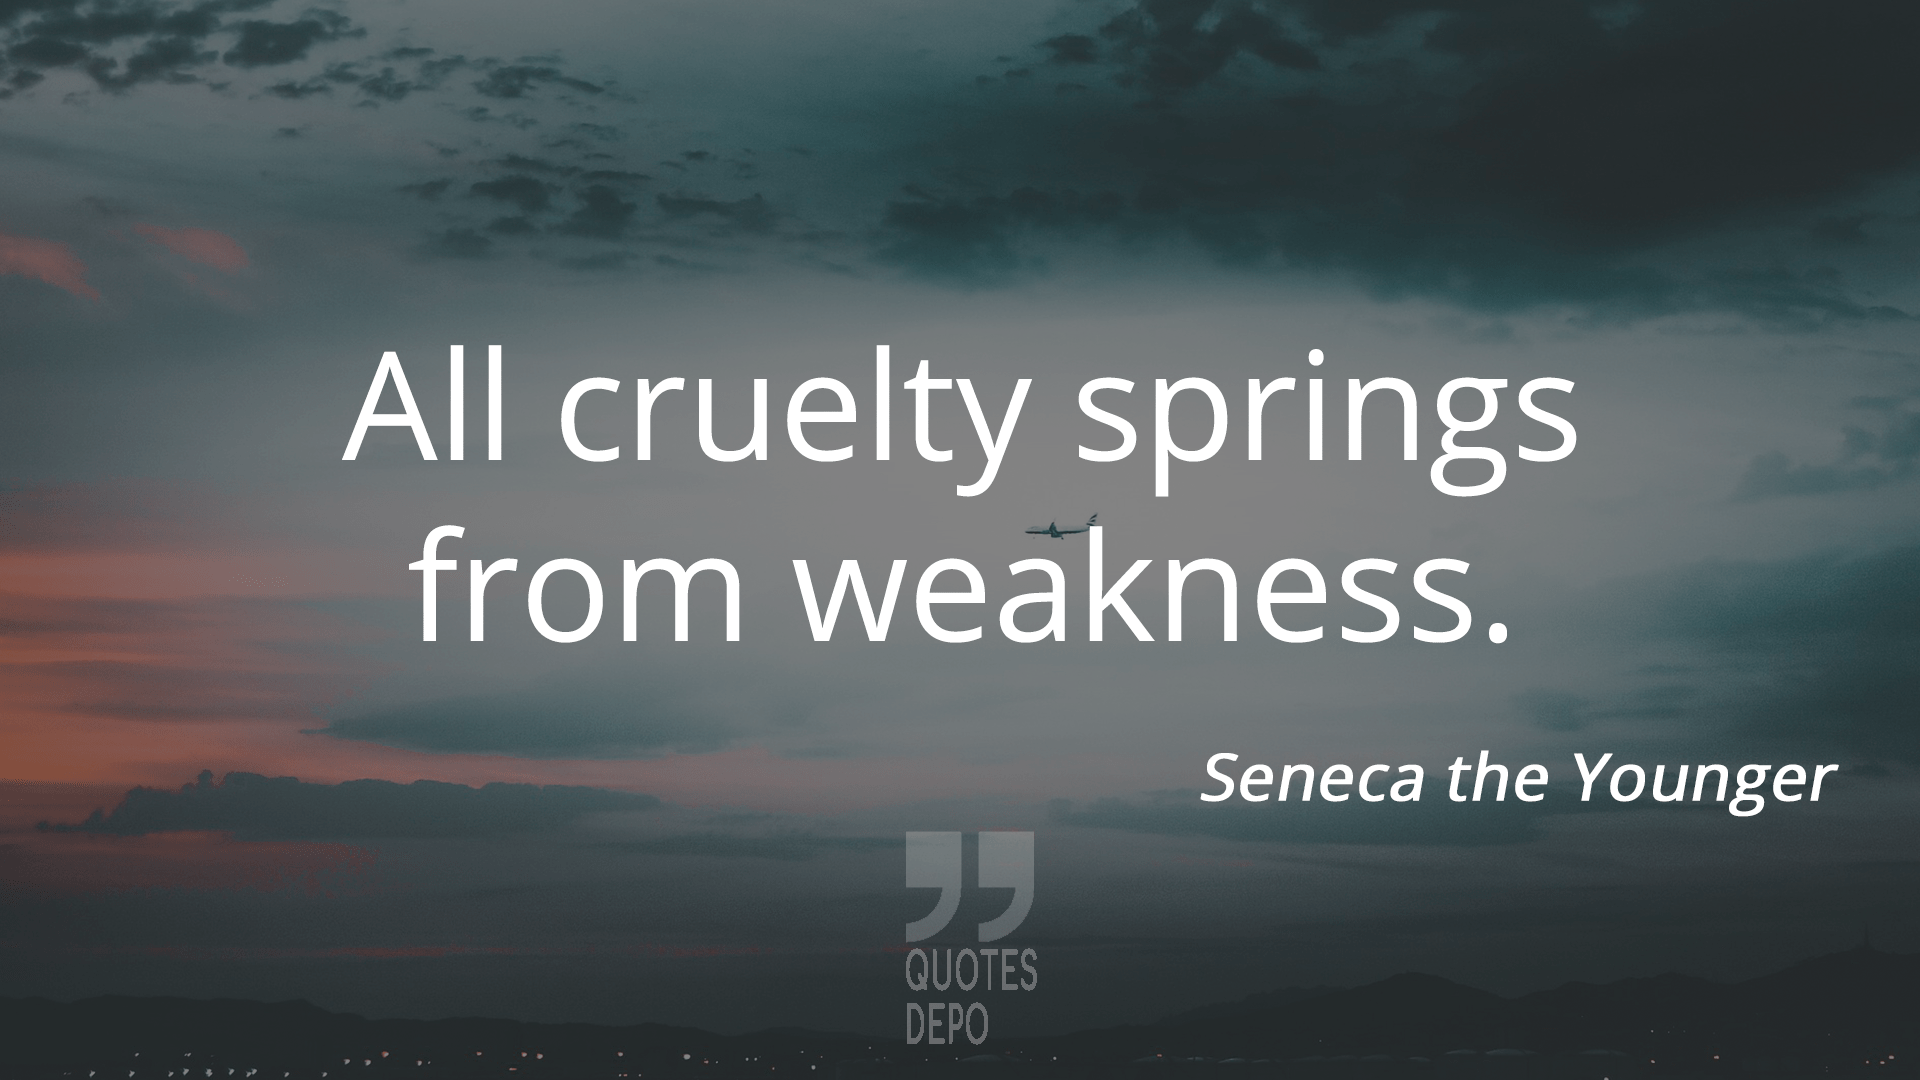 all cruelty springs from weakness - seneca the younger quotes